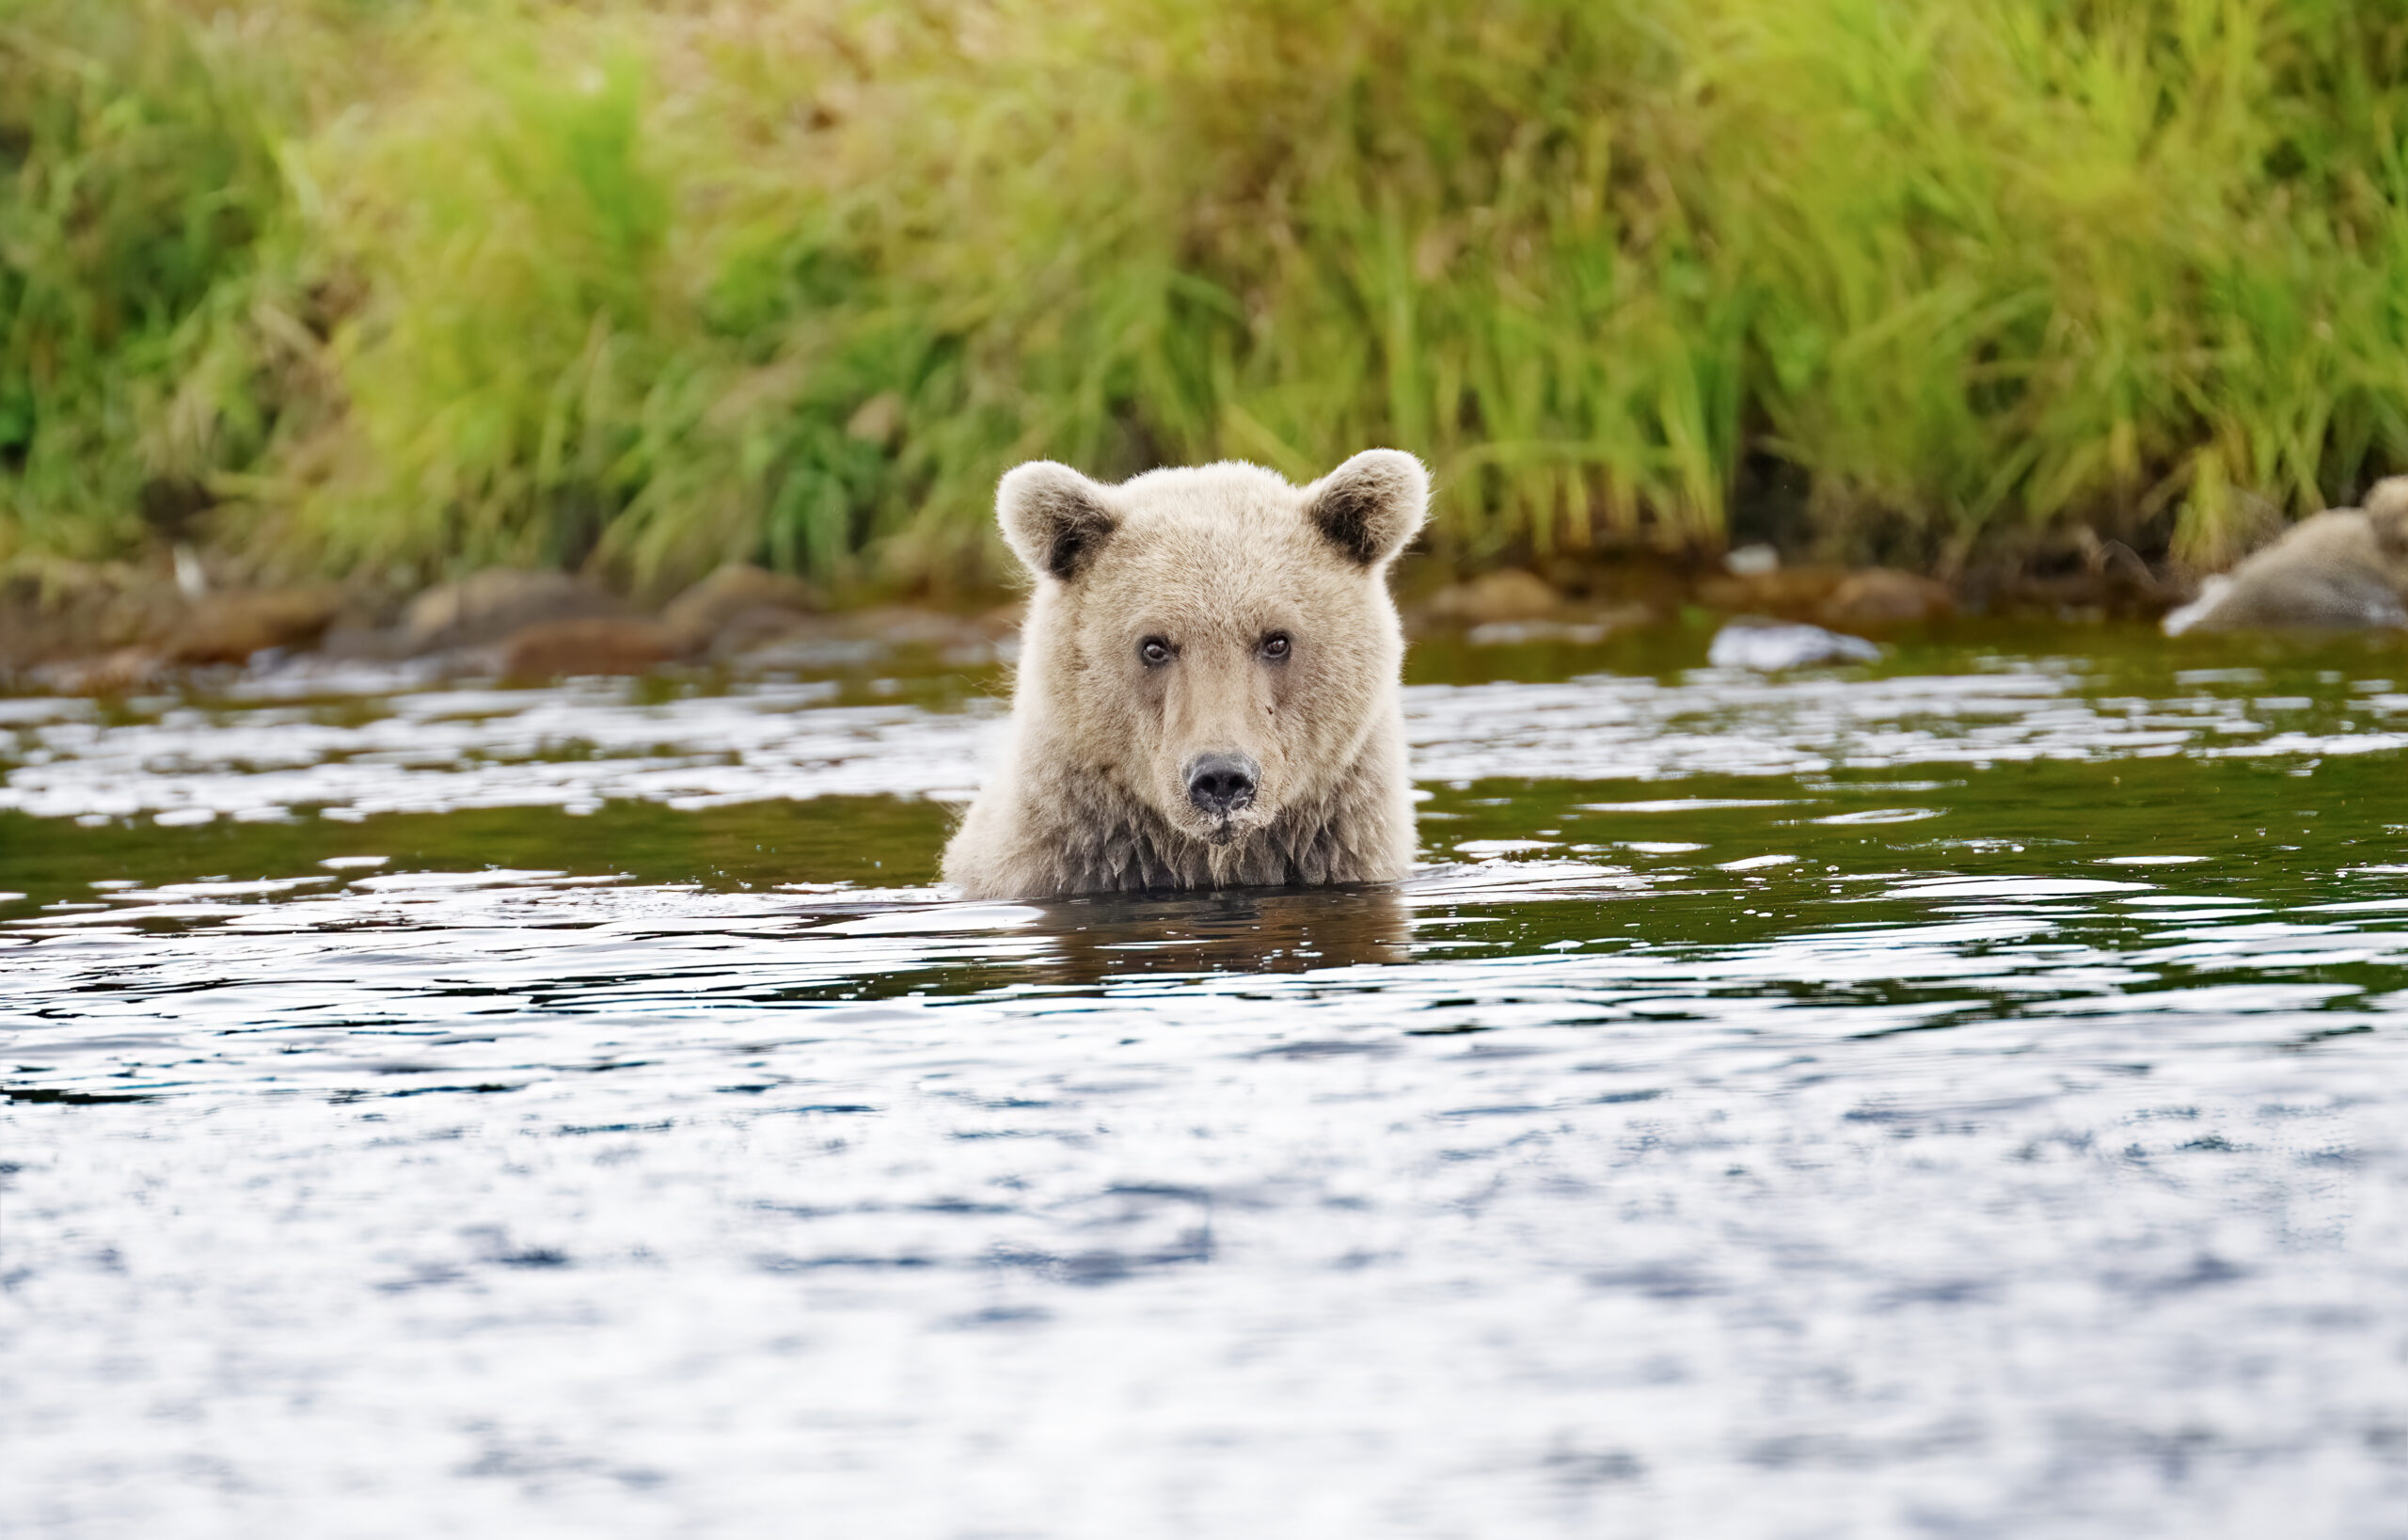 Grizzly Bear in The Alaskan Waters - Photo by Tamara Lackey